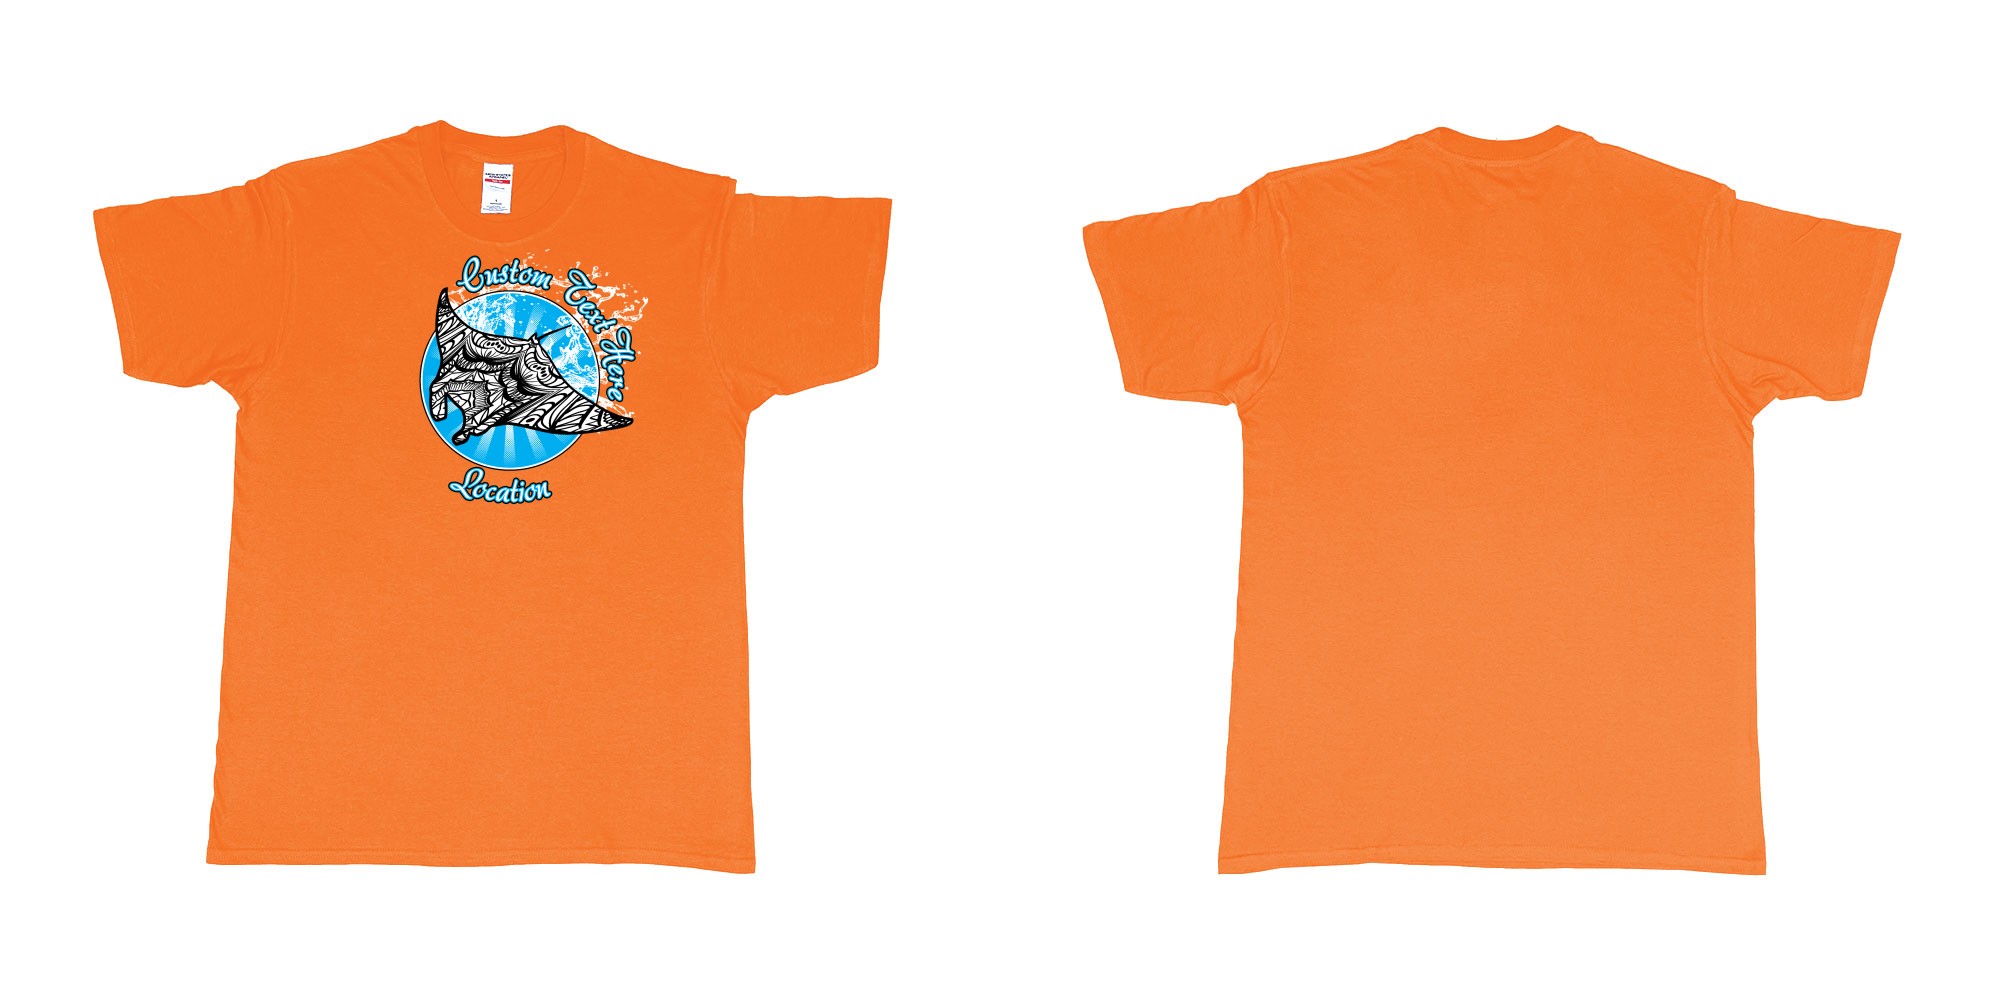 Custom tshirt design manta mandala circle splash own text here location in fabric color orange choice your own text made in Bali by The Pirate Way